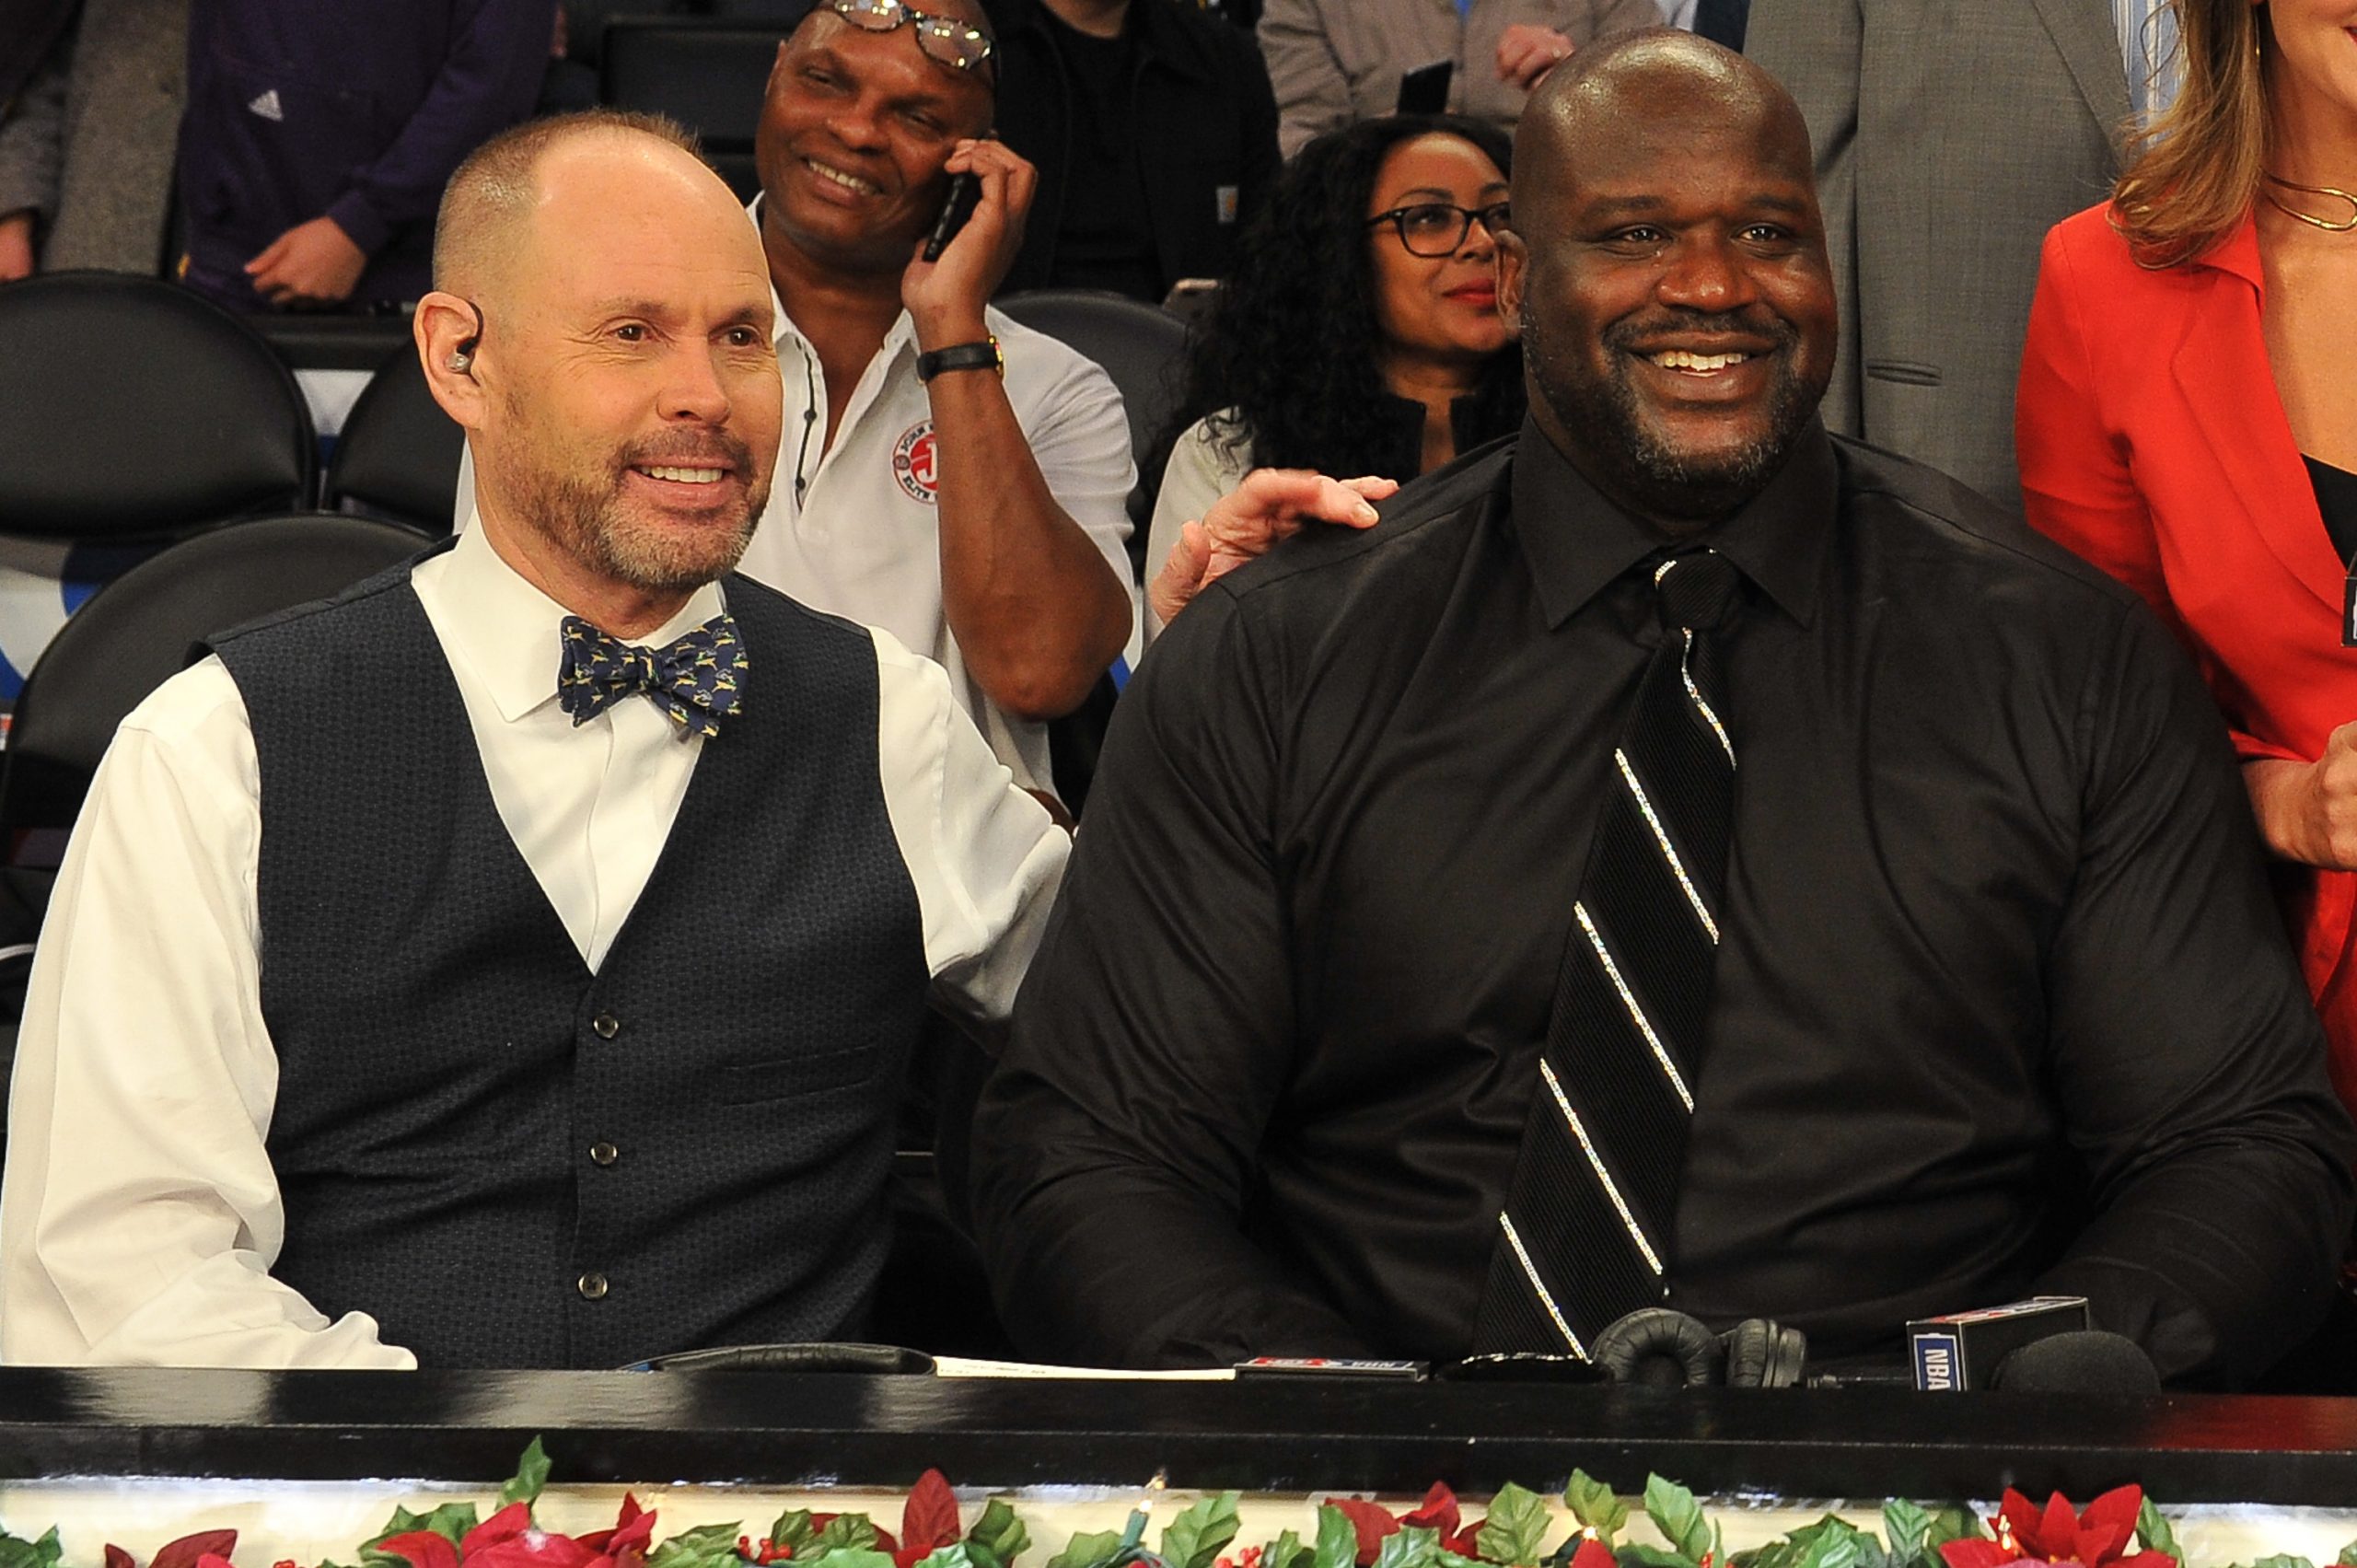 Ernie Johnson Jr. (L) and Shaquille O'Neal attend a basketball game between the Los Angeles Lakers and the Minnesota Timberwolves.